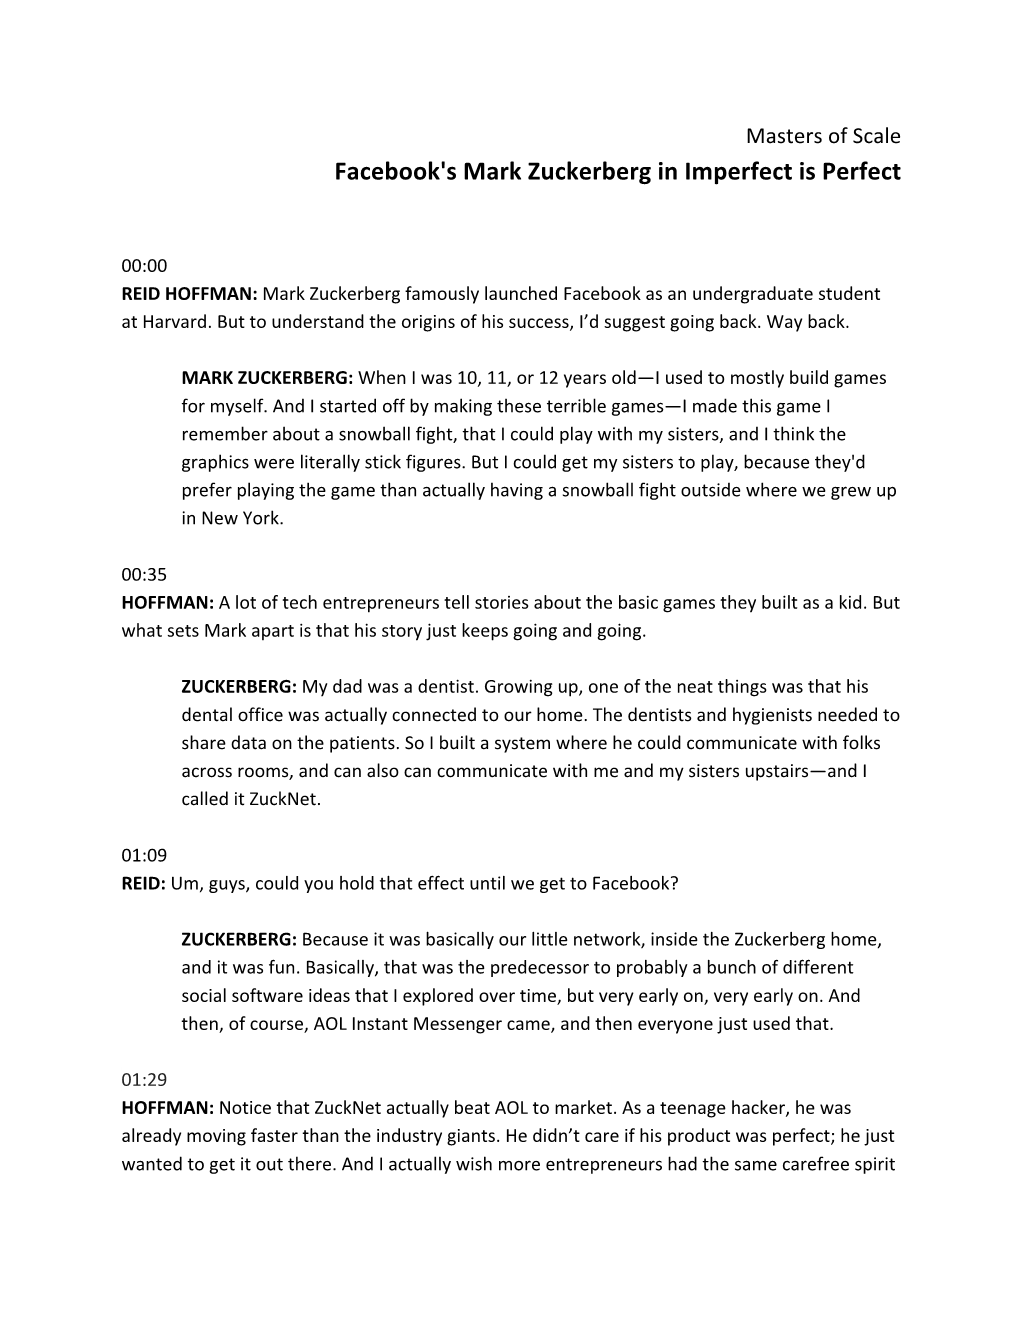 Facebook's Mark Zuckerberg in Imperfect Is Perfect